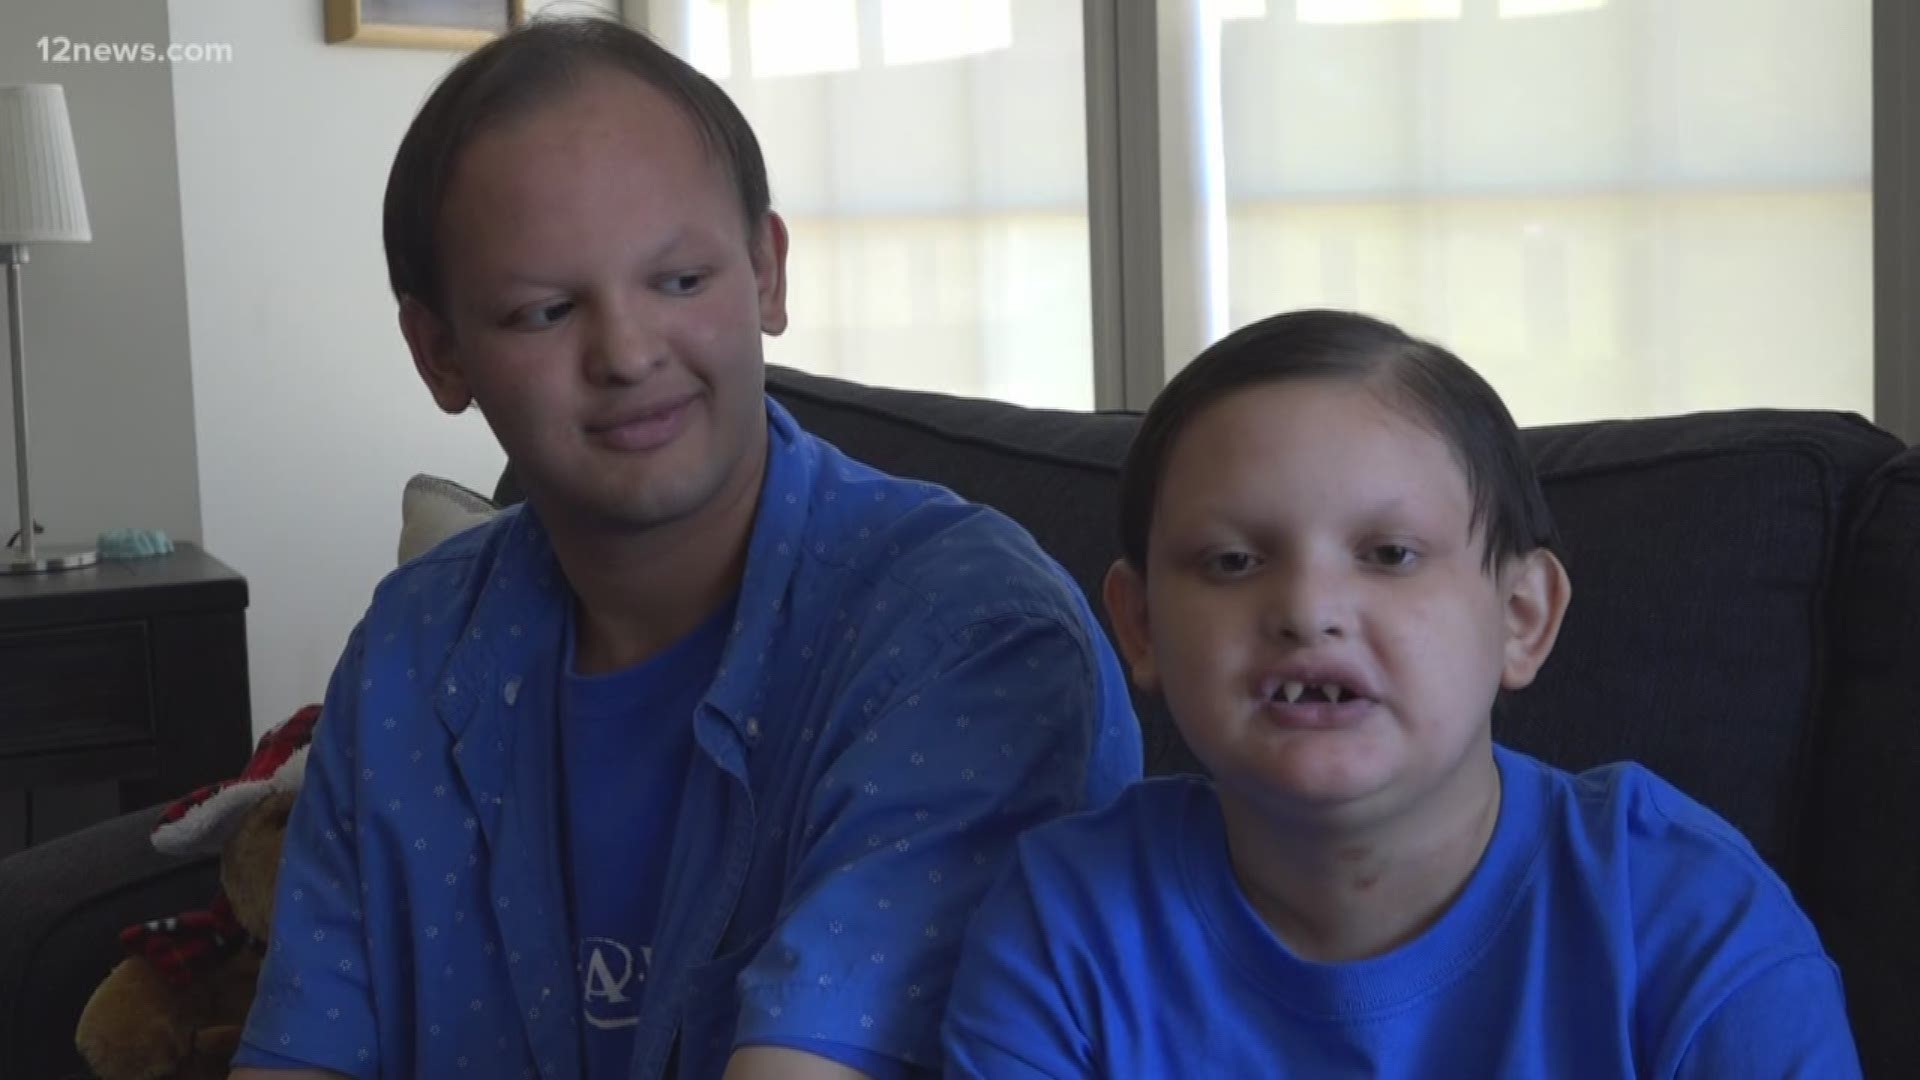 Mikey and David share a difficult and rare condition, but that hasn't stopped them from living it up.